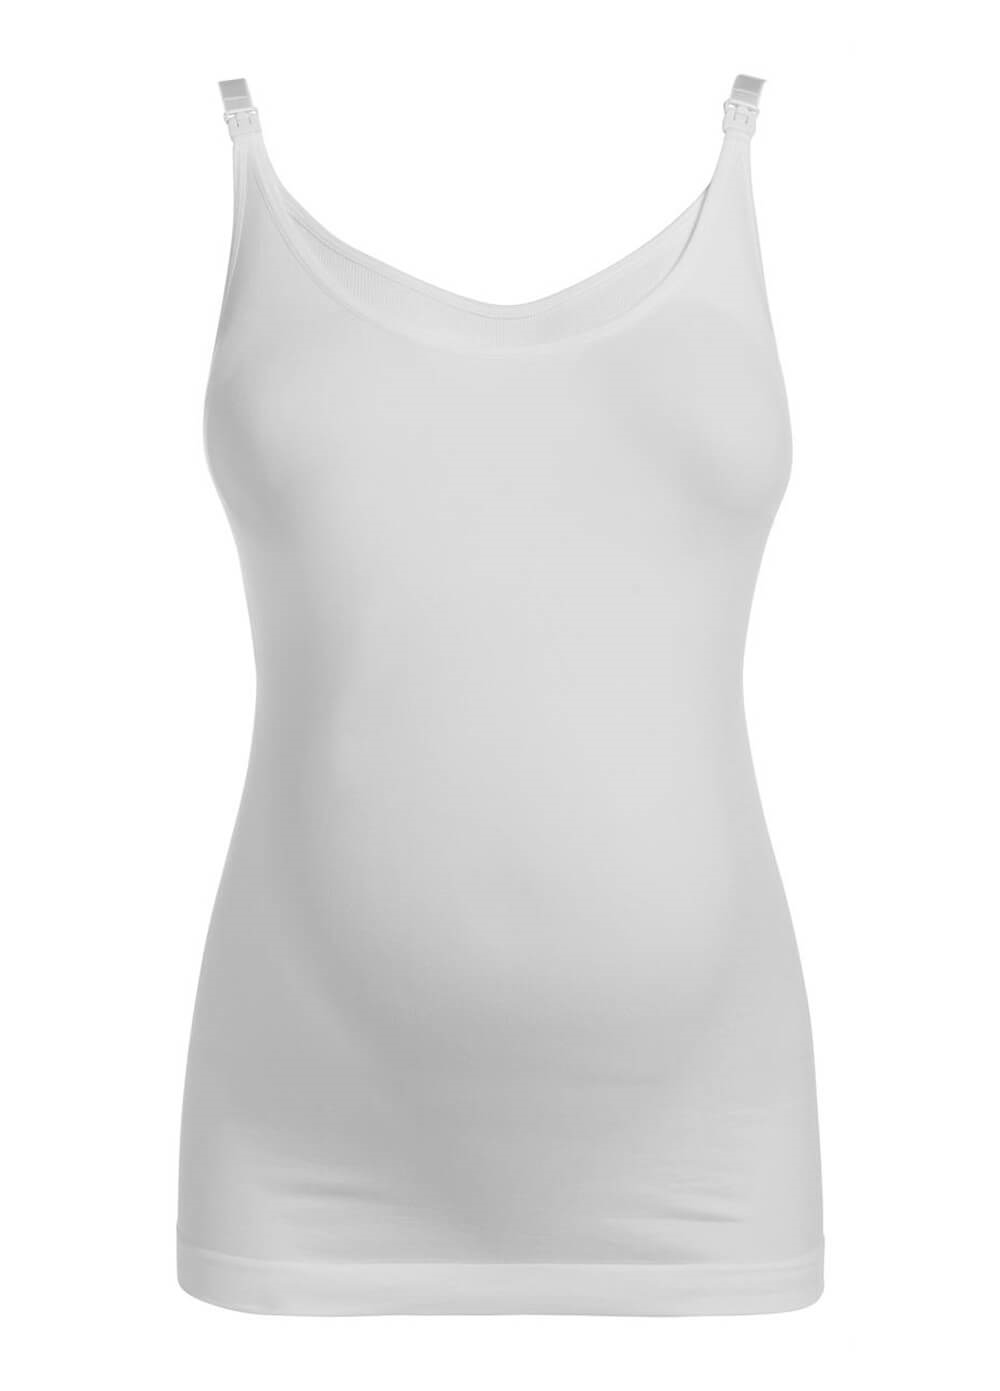 Seamless Maternity Nursing Cami in White by Noppies | Queen Bee